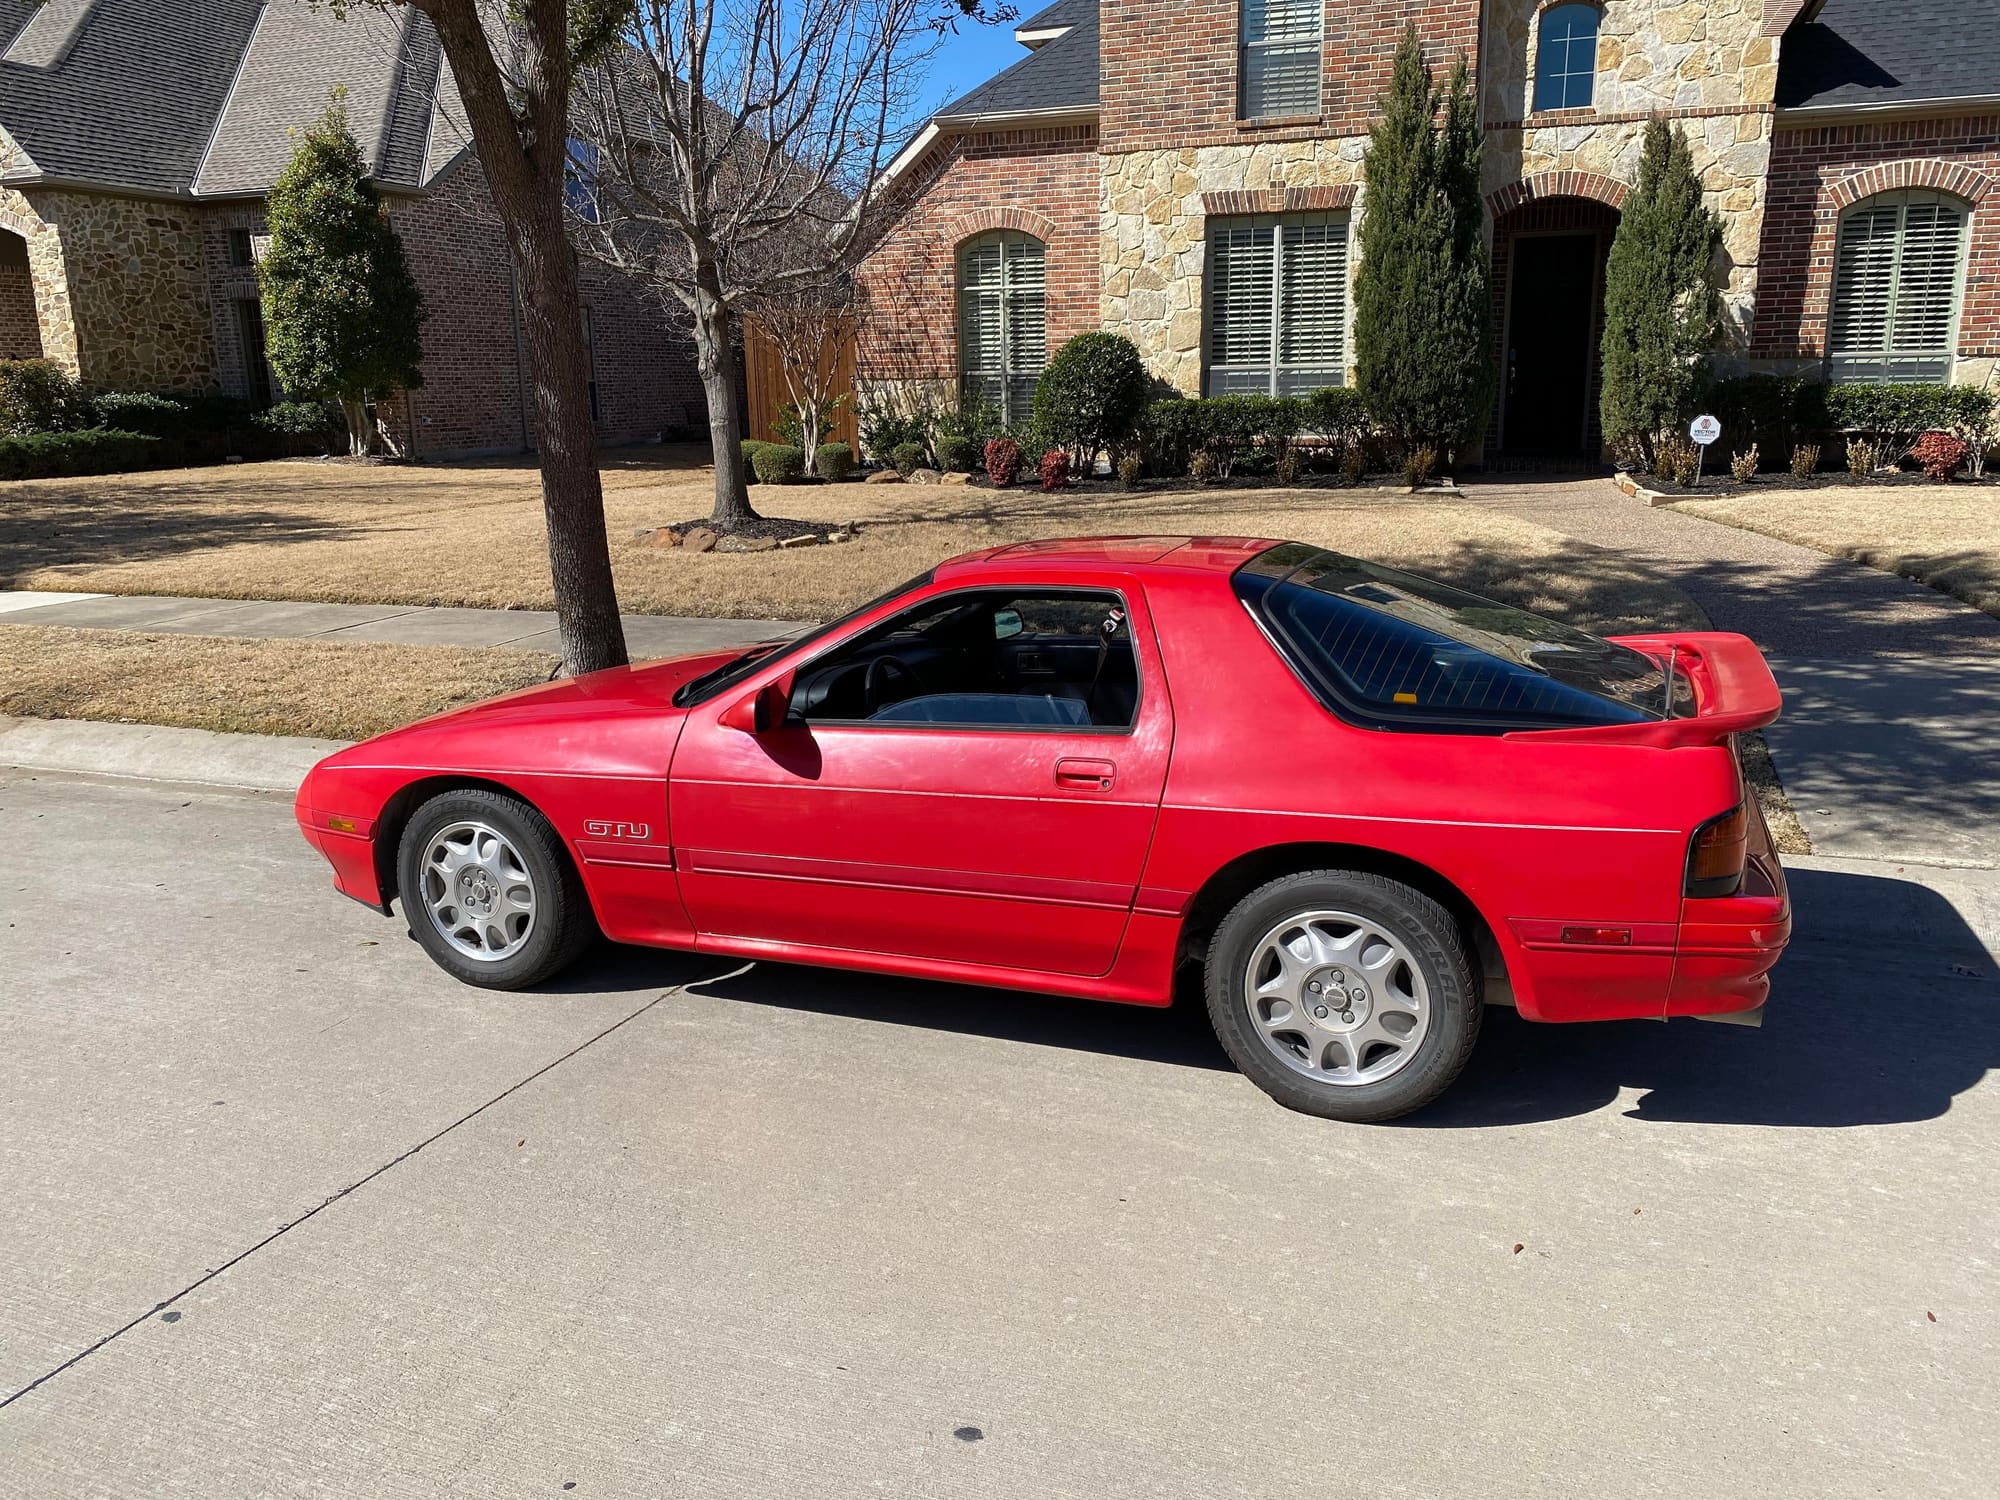 1990 Mazda RX-7 - 1990 na fc3 - Used - VIN JM1FC3319L0802915 - 158,938 Miles - Other - 2WD - Manual - Hatchback - Red - Plano, TX 75011, United States